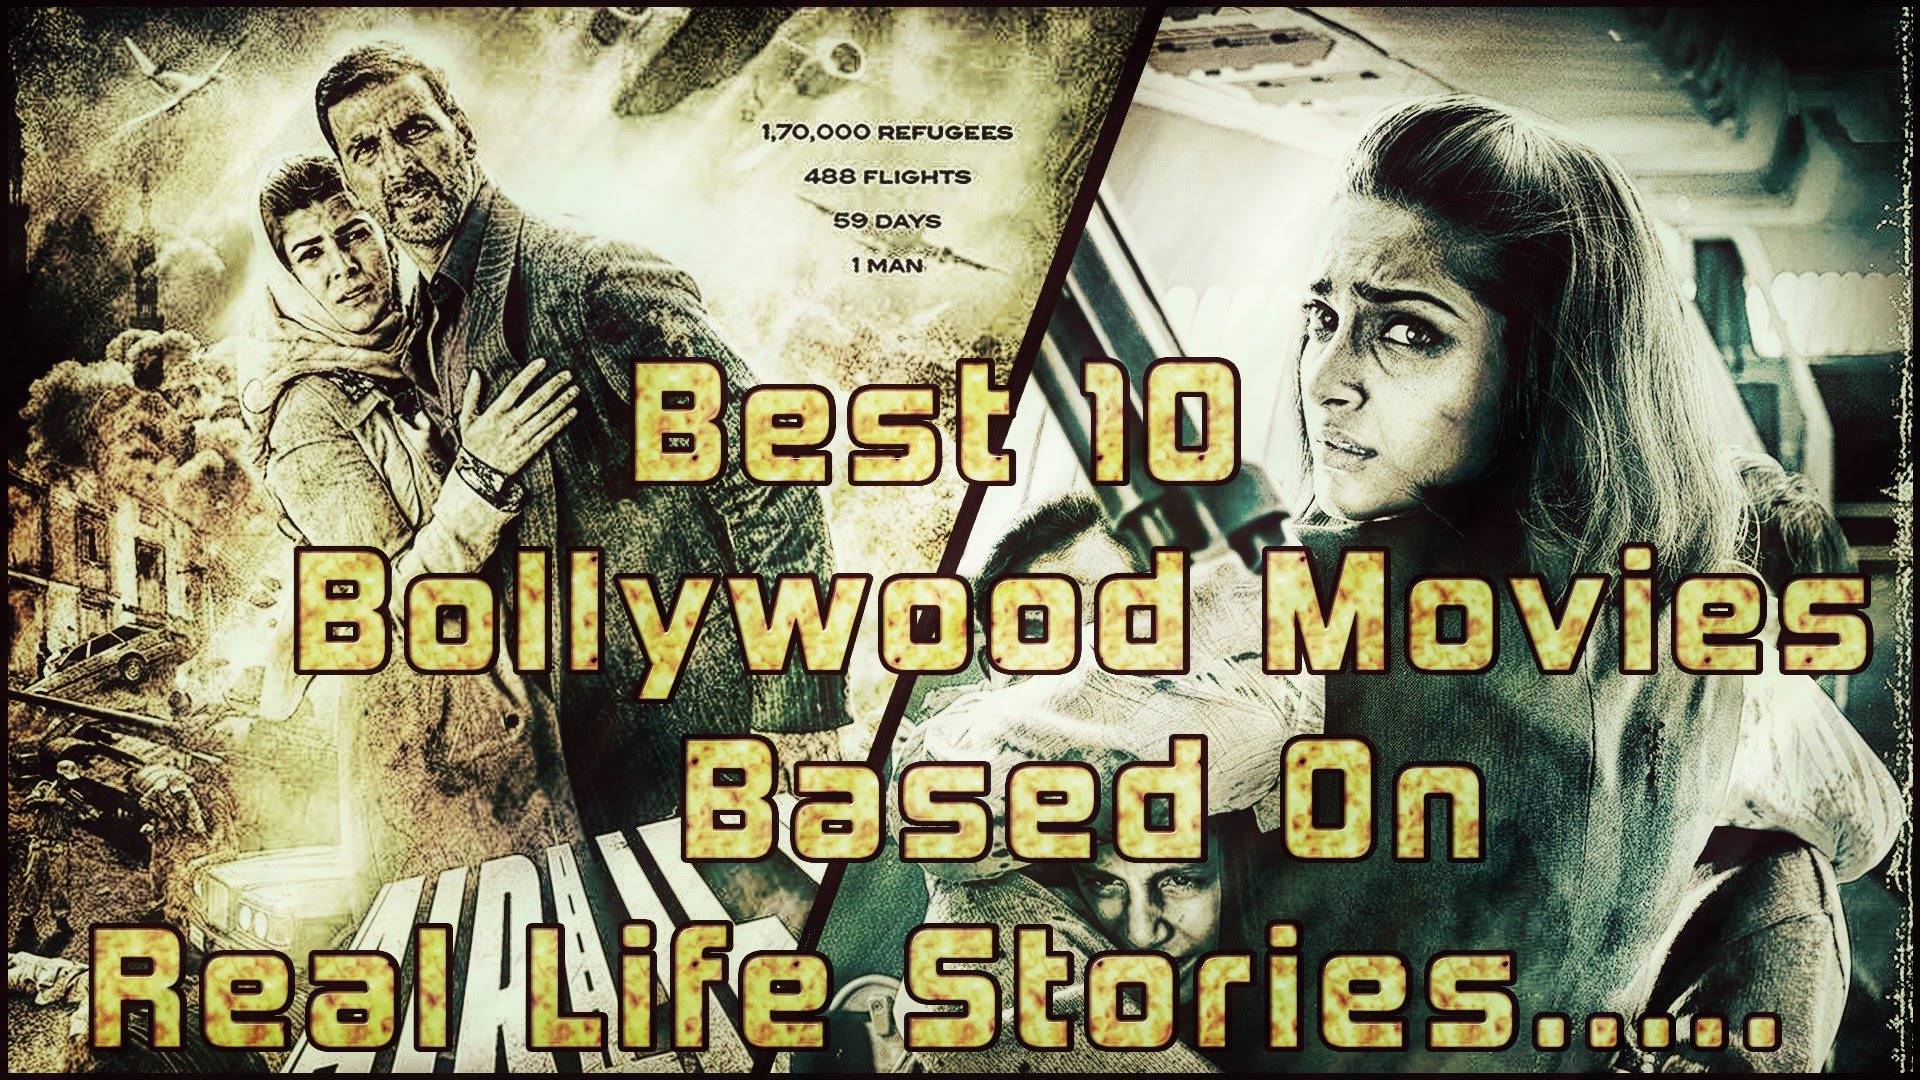 Life story films. Movies based on a true story. Films based on true story.